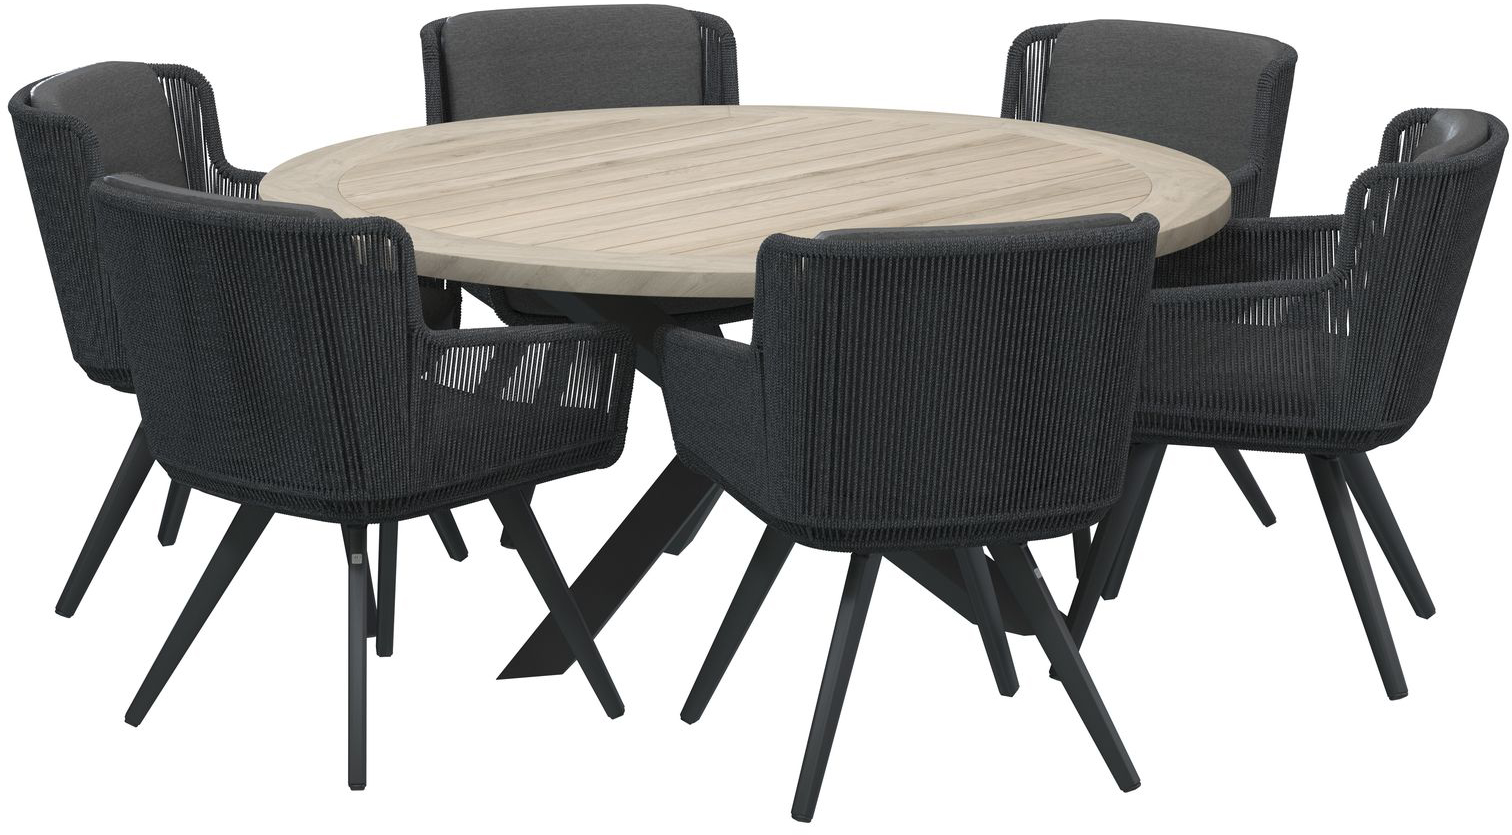 4 Seasons Outdoor Flores 6 Seat Louvre Dining Set